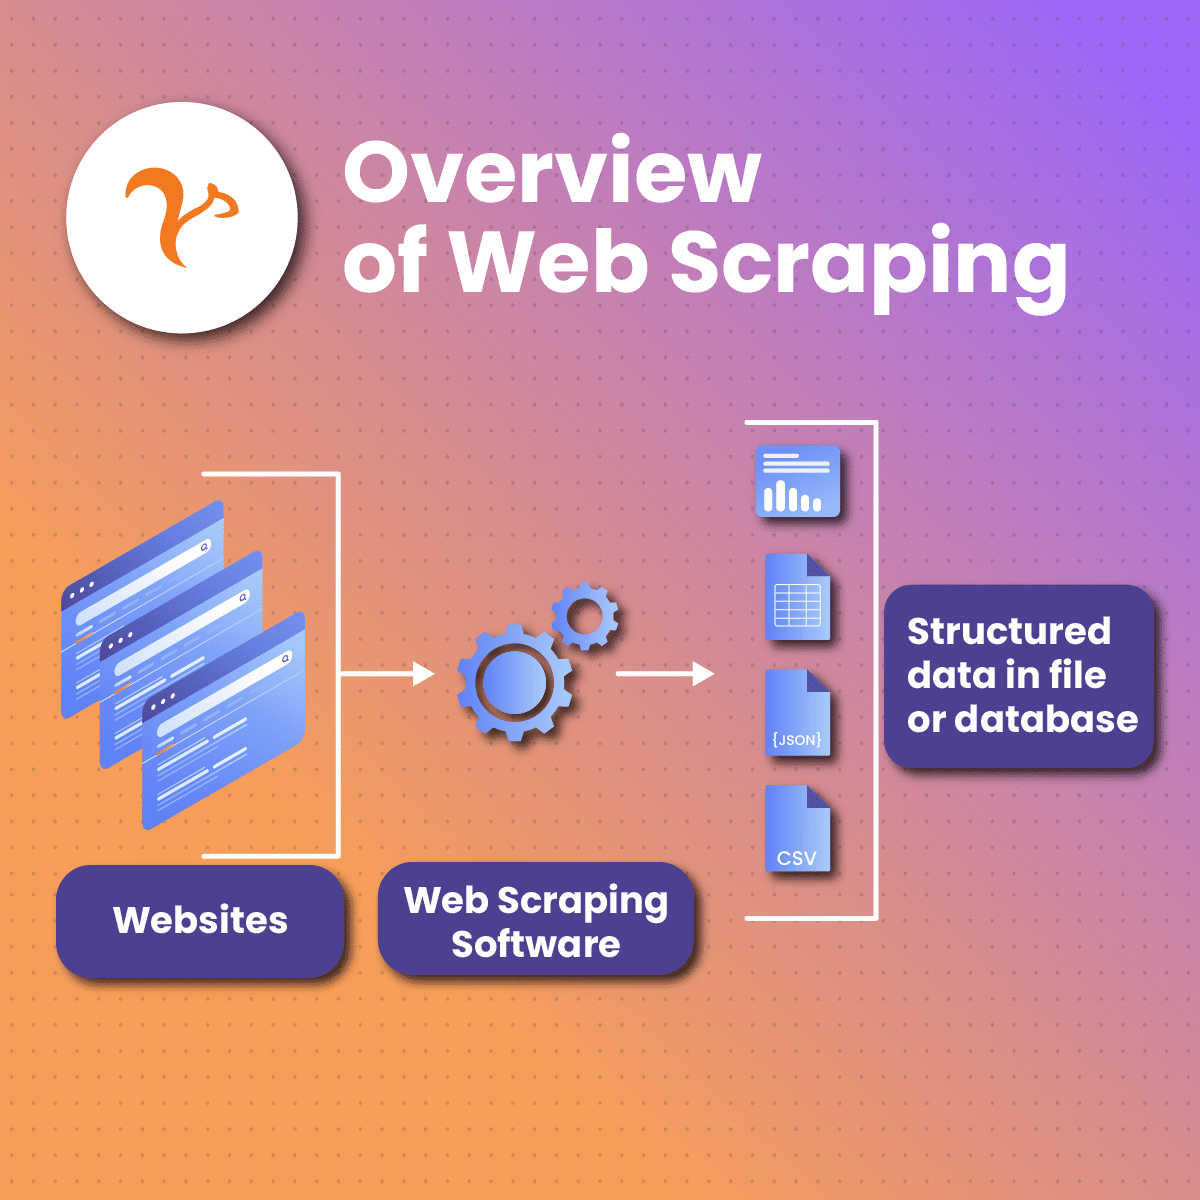 Overview of Web Scraping